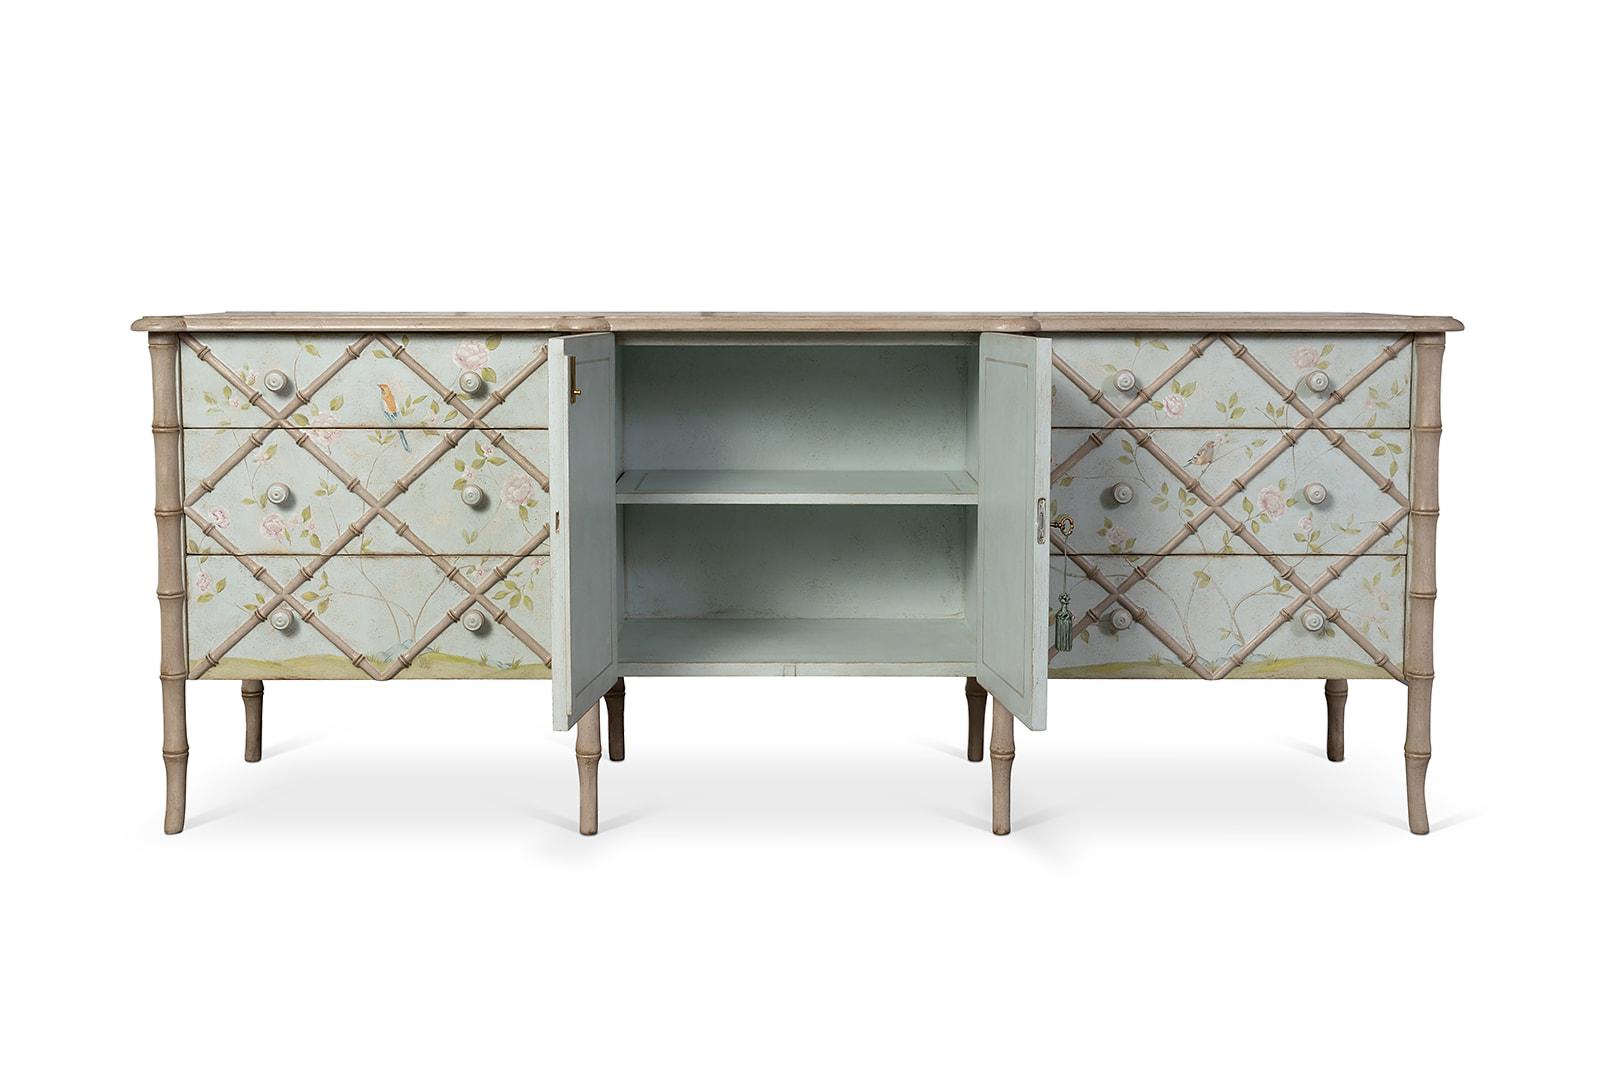 From our hand painted Furniture Collection, we are pleased to introduce you to our Azur Fiesole Console with Bamboo edges. 
This eclectic piece will bring just the right amount of whimsy to your room, together with the reassurance of a Venatian